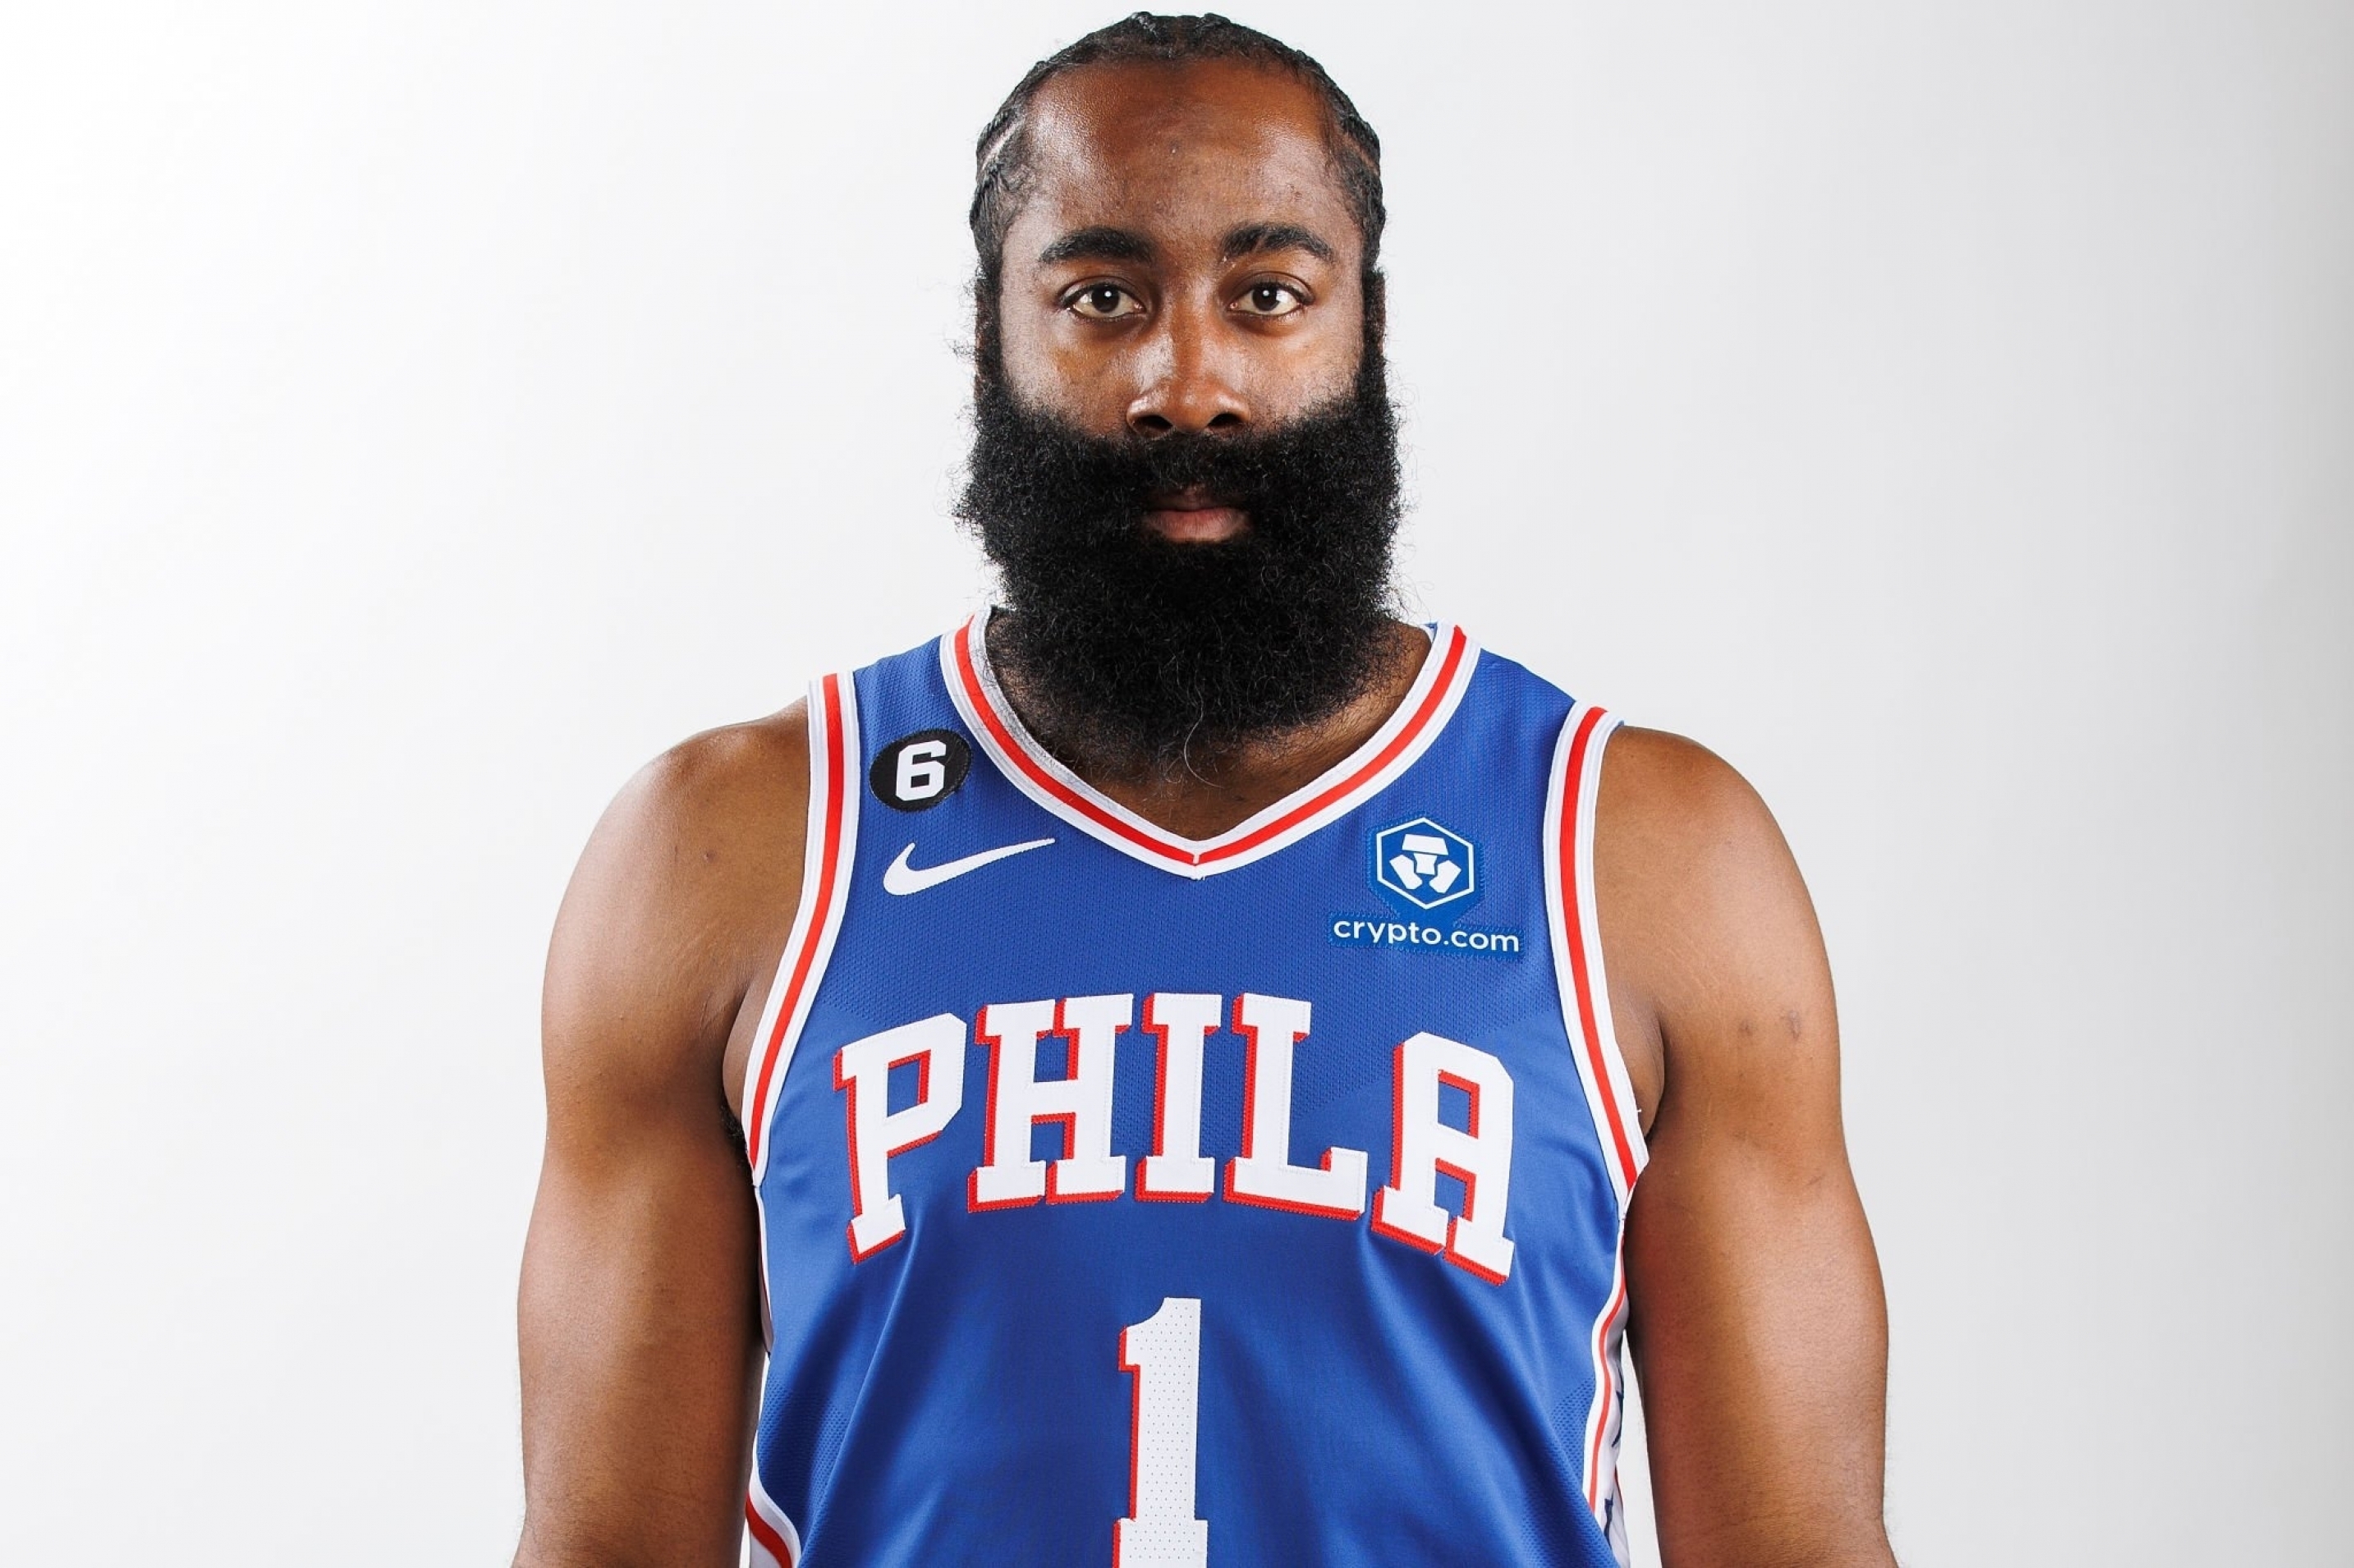 James Harden - Basketball & Sports Background Wallpapers on